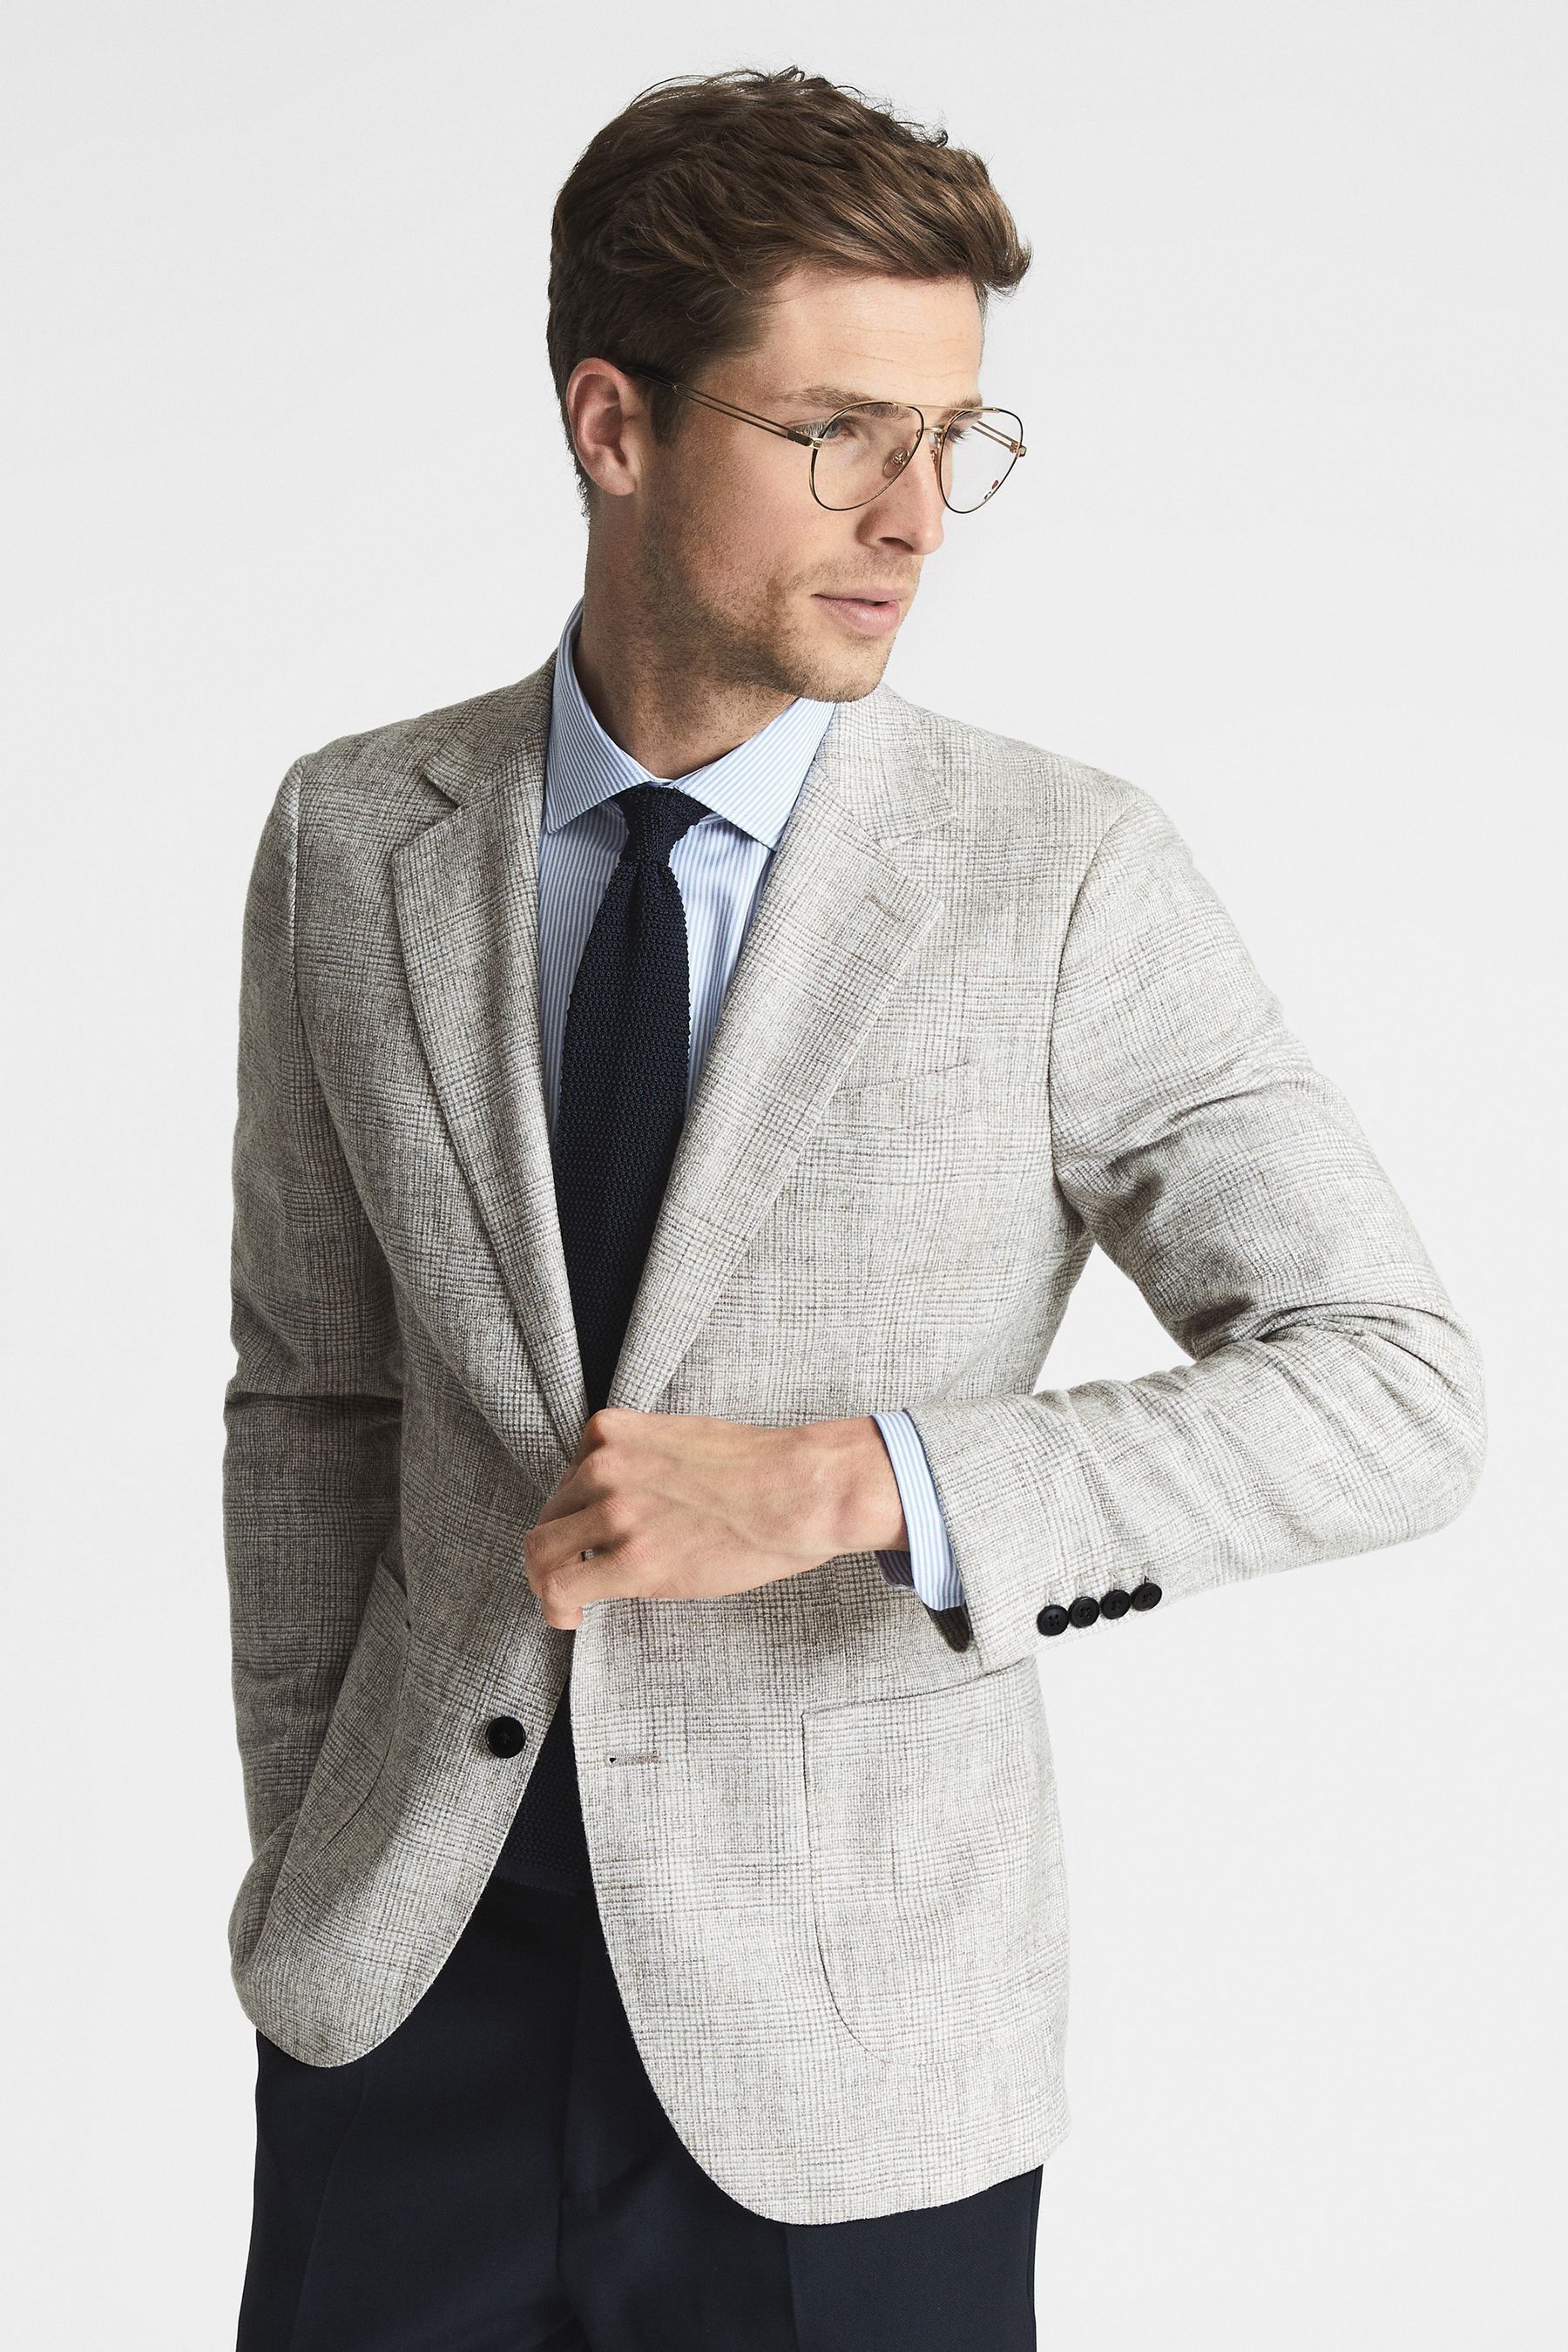 REISS LINDHURST - OATMEAL SINGLE BREASTED CHECK BLAZER, 42R